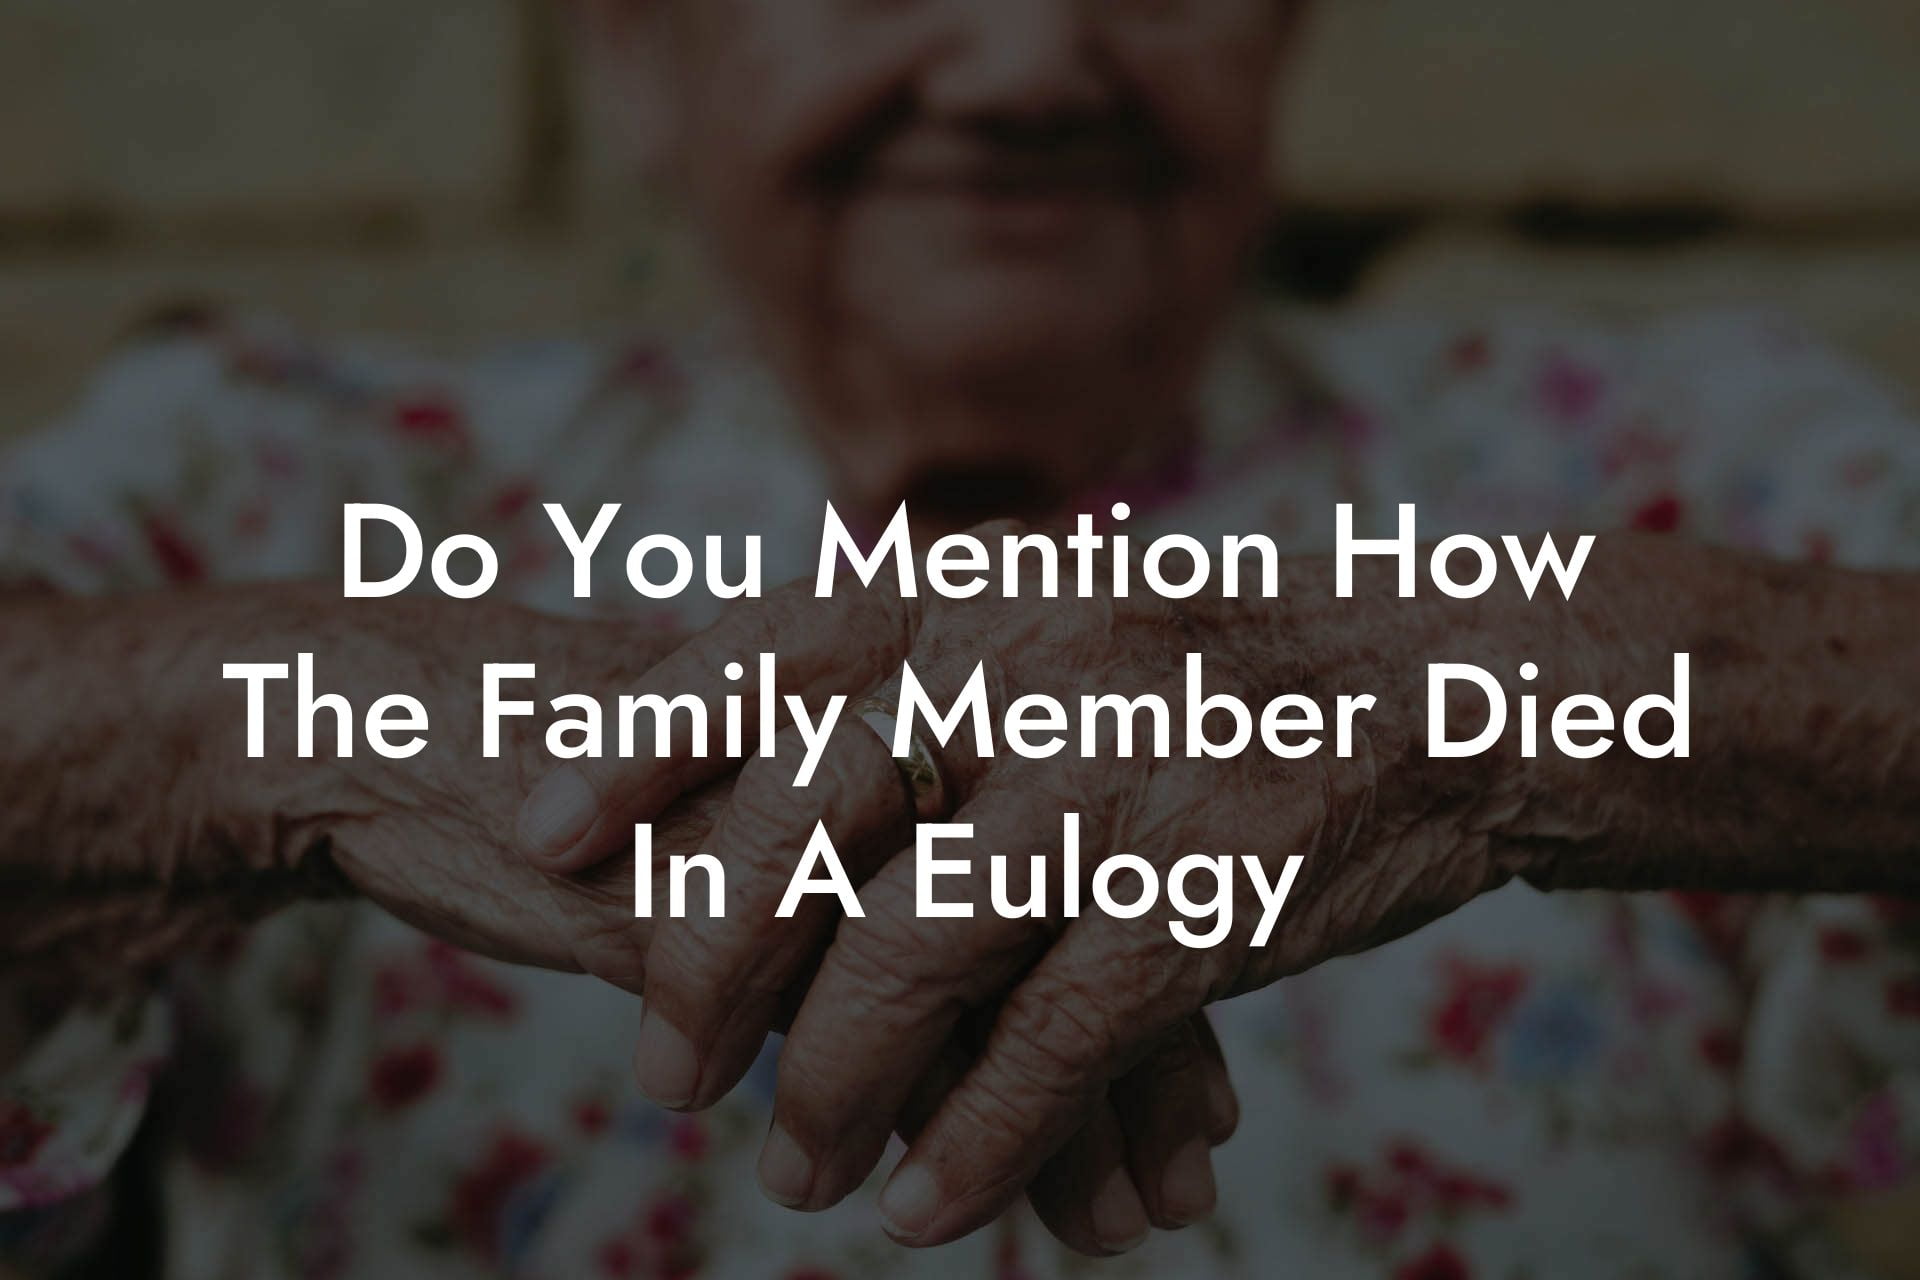 Do You Mention How The Family Member Died In A Eulogy